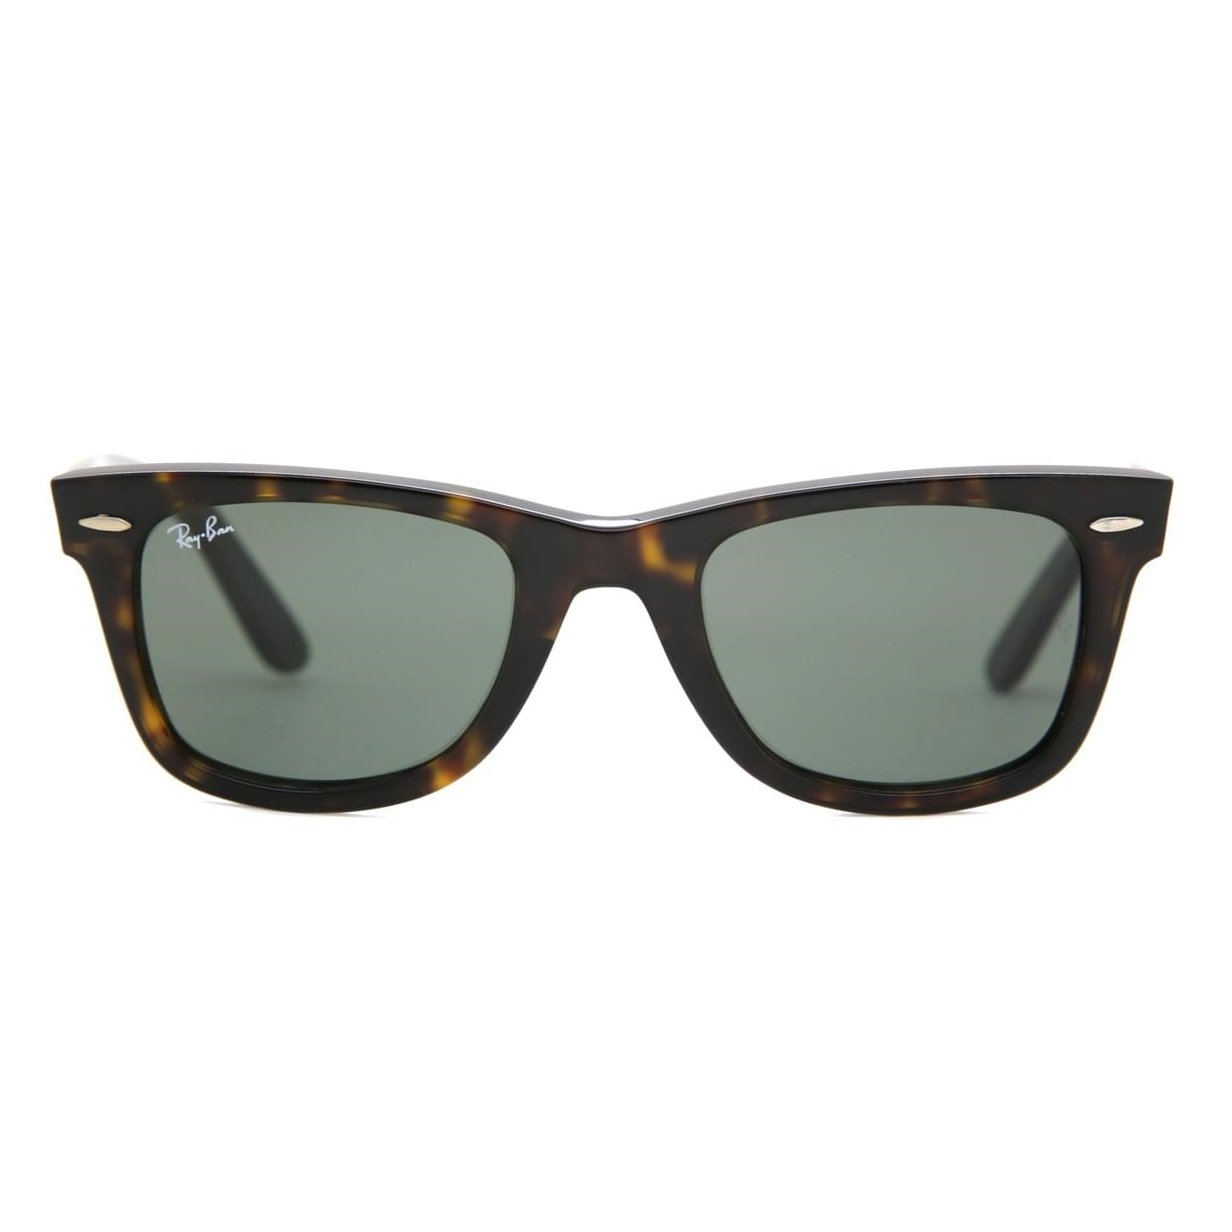 Ray-Ban RB2140 Sunglasses (Tortoise) - Purevision - The Sunglasses Shop ...